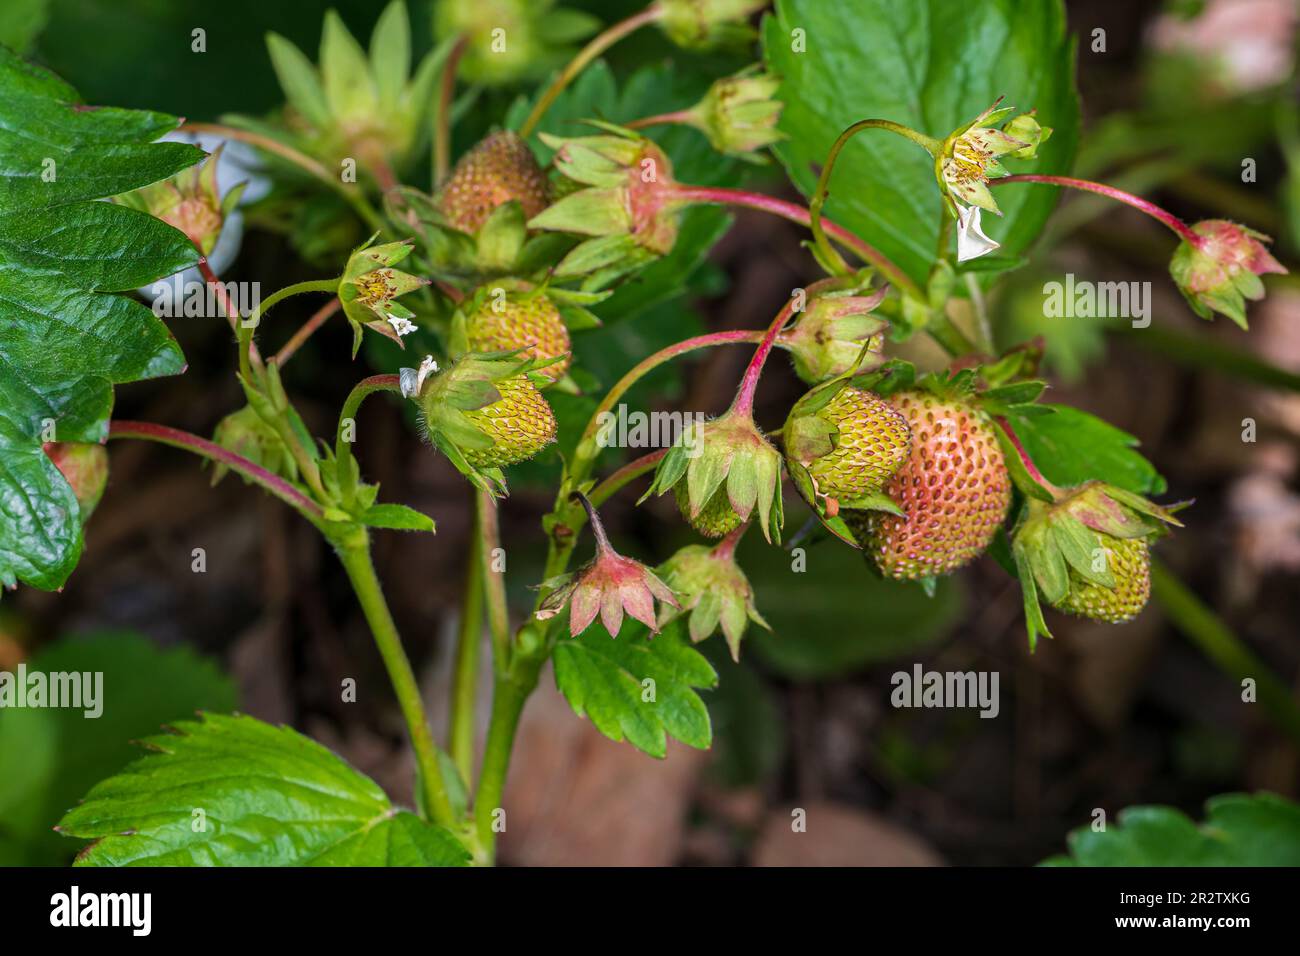 Strawberry plant flower and fruit growing in garden. Gardening, horticulture and farming concept Stock Photo